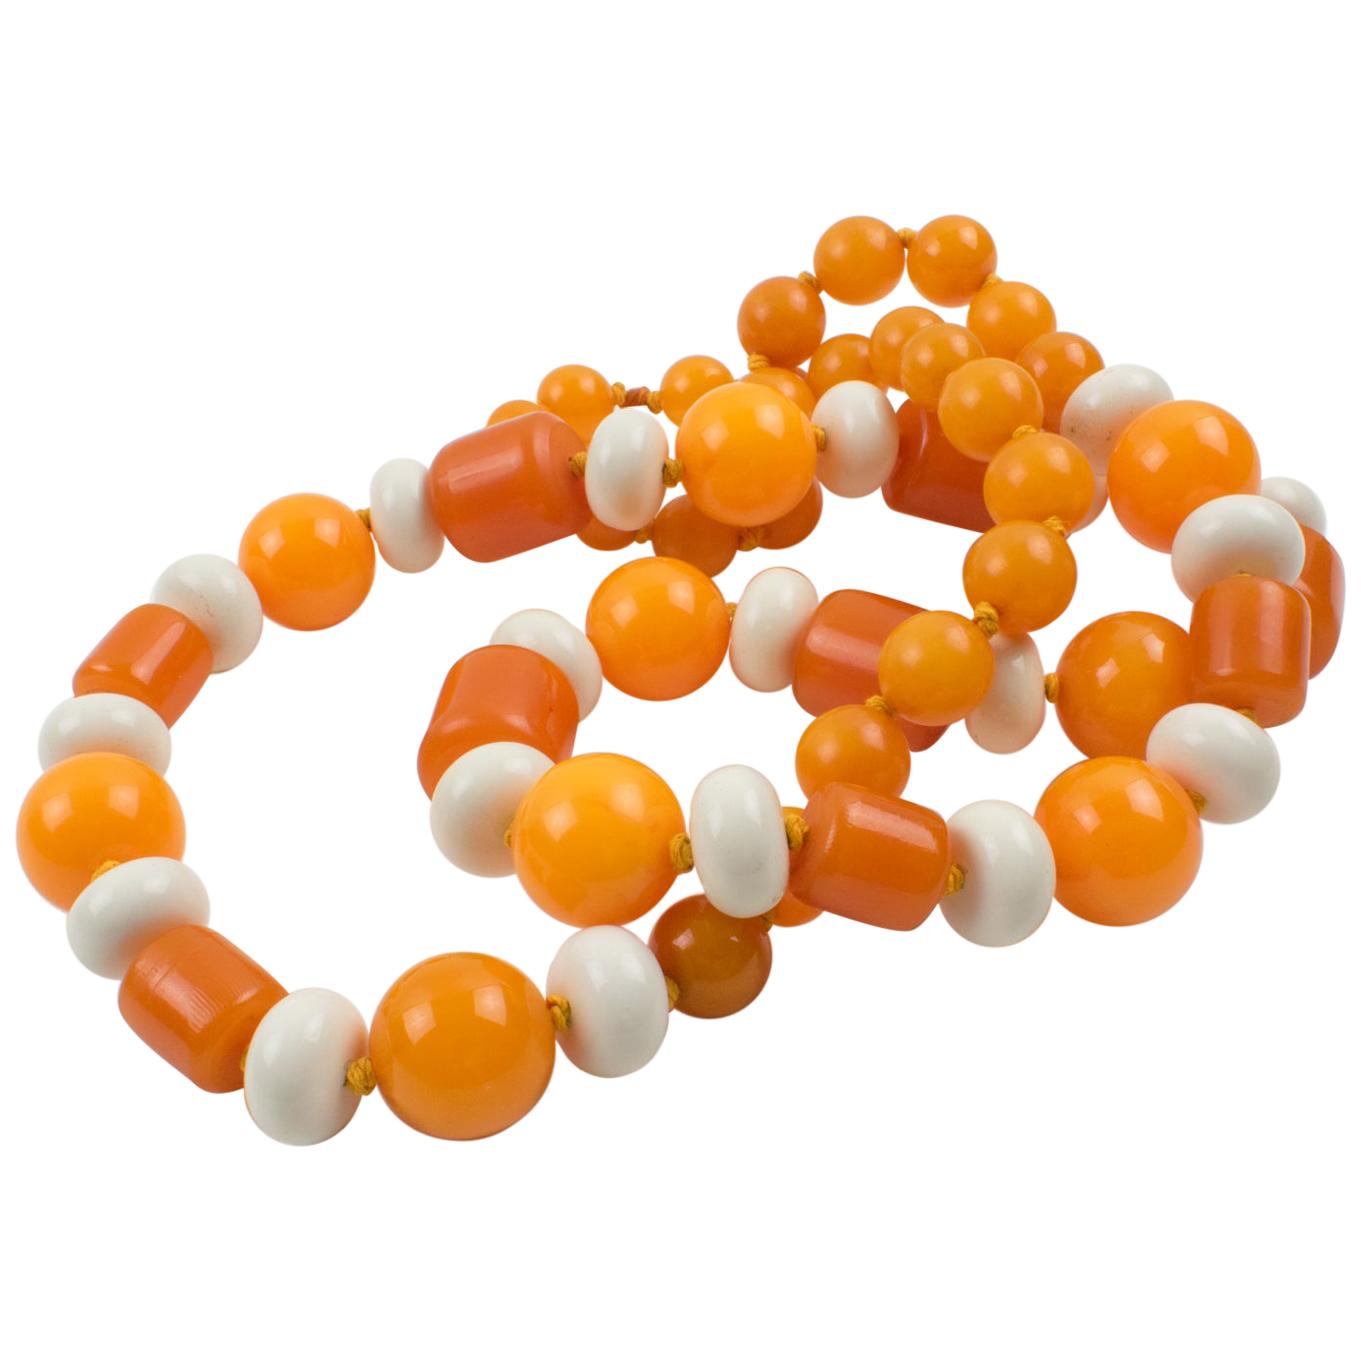 Bakelite and Lucite Long Necklace Orange and White Colors For Sale